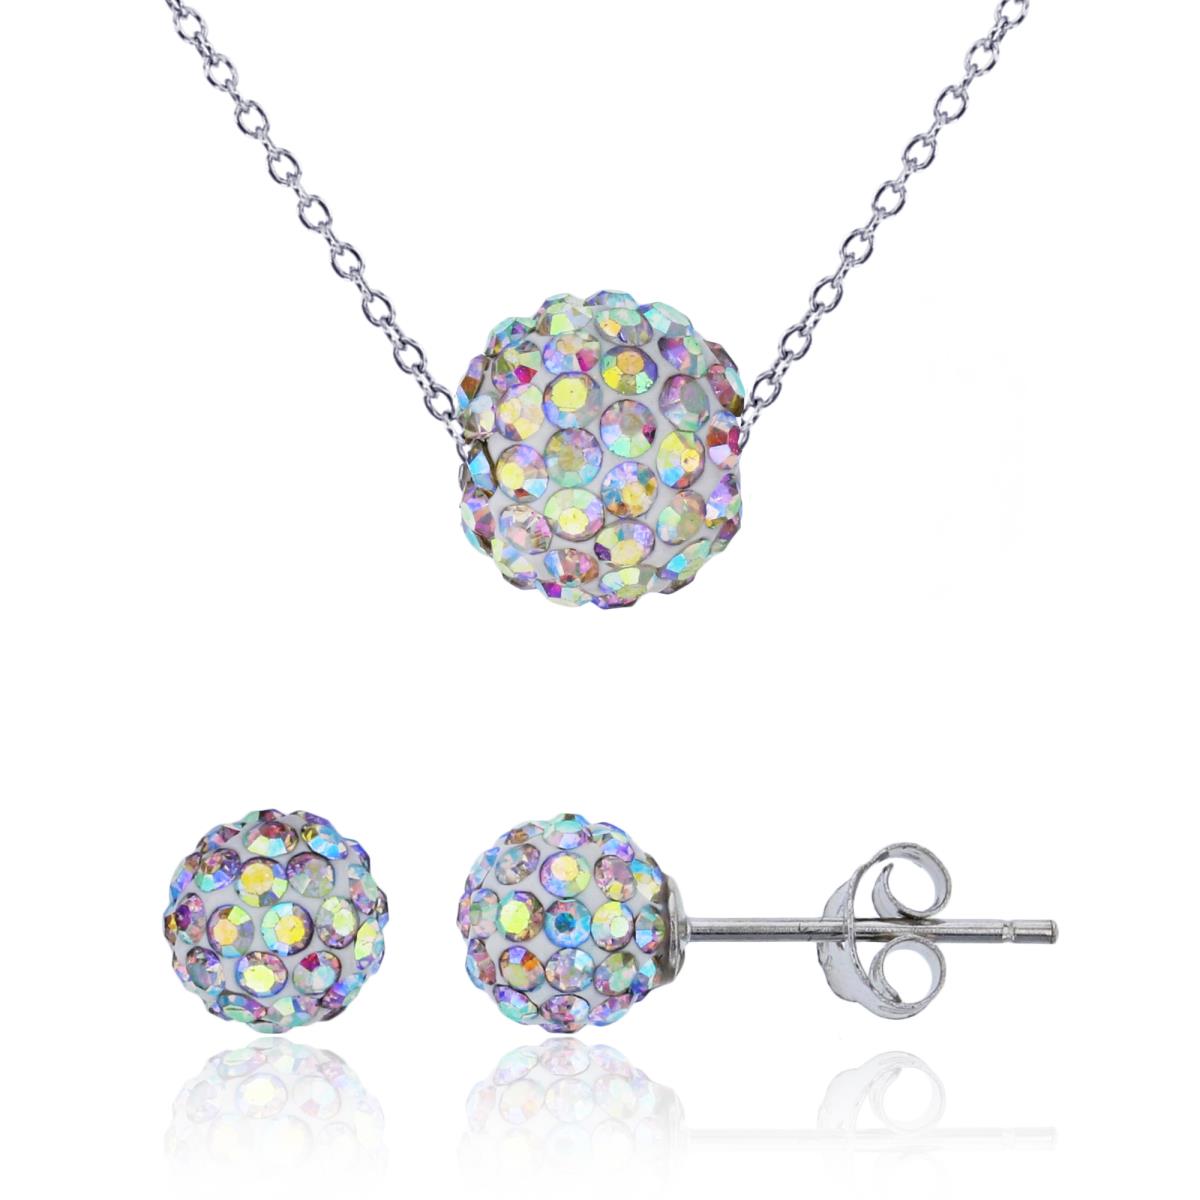 Sterling Silver Rhodium 6mm AB Crystal Fireball Bead Stud & 8mm 18" Ecoated Necklace Set